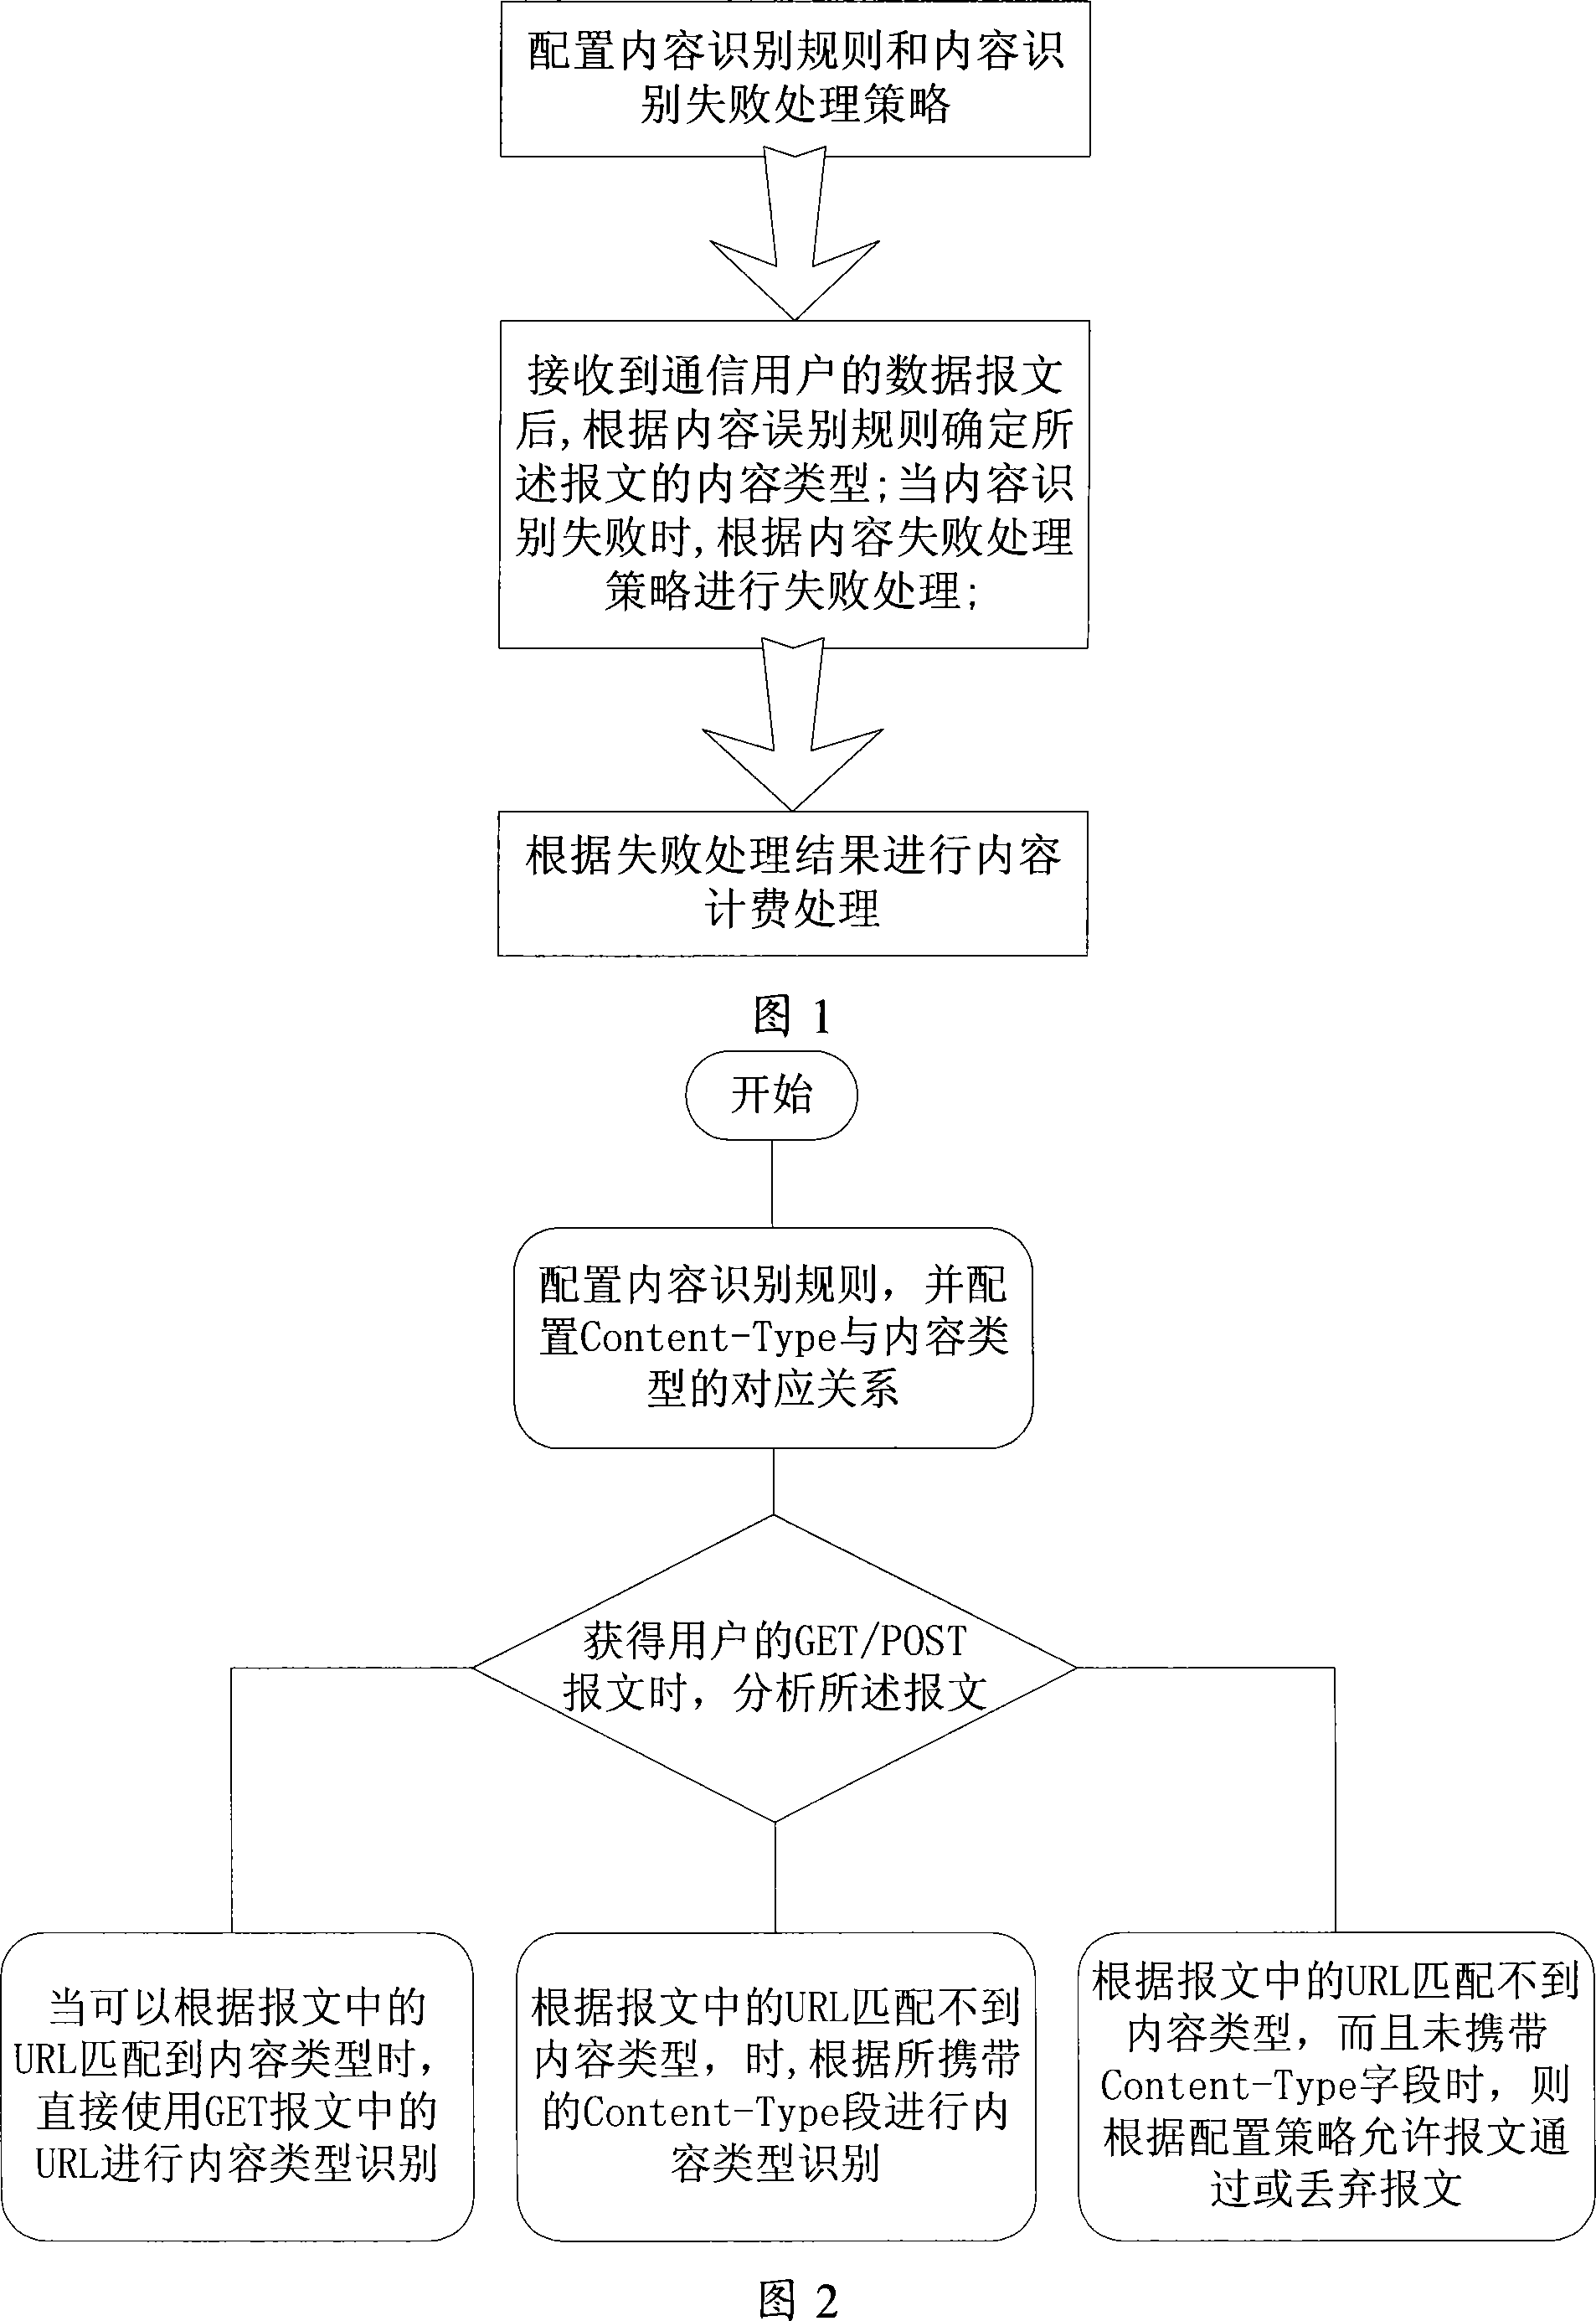 Content type recognition method and device